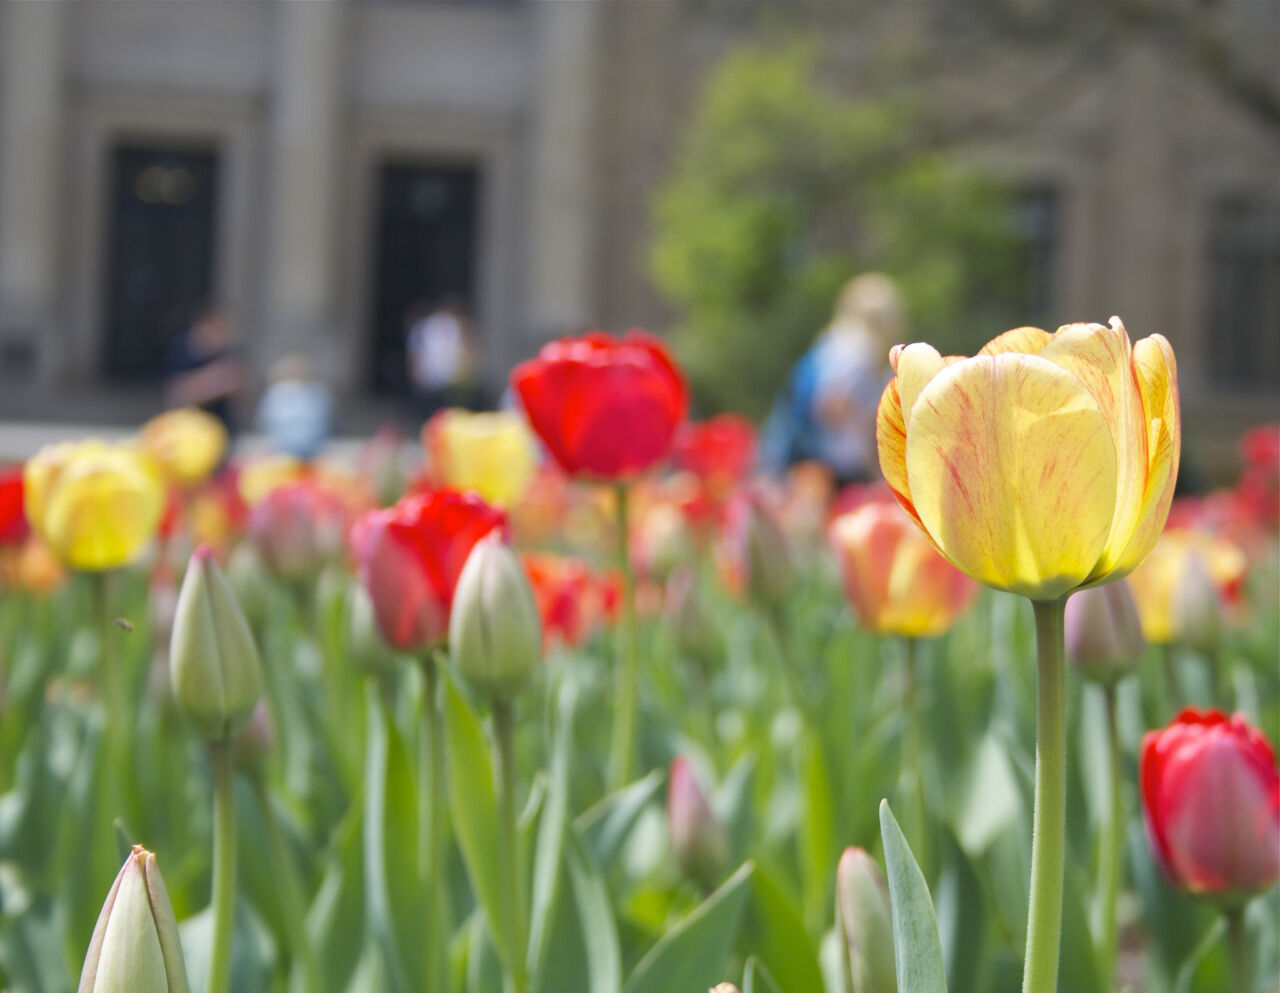 A vibrant row of red and yellow tulips in the foreground with a tan stone building in the background in soft focus.